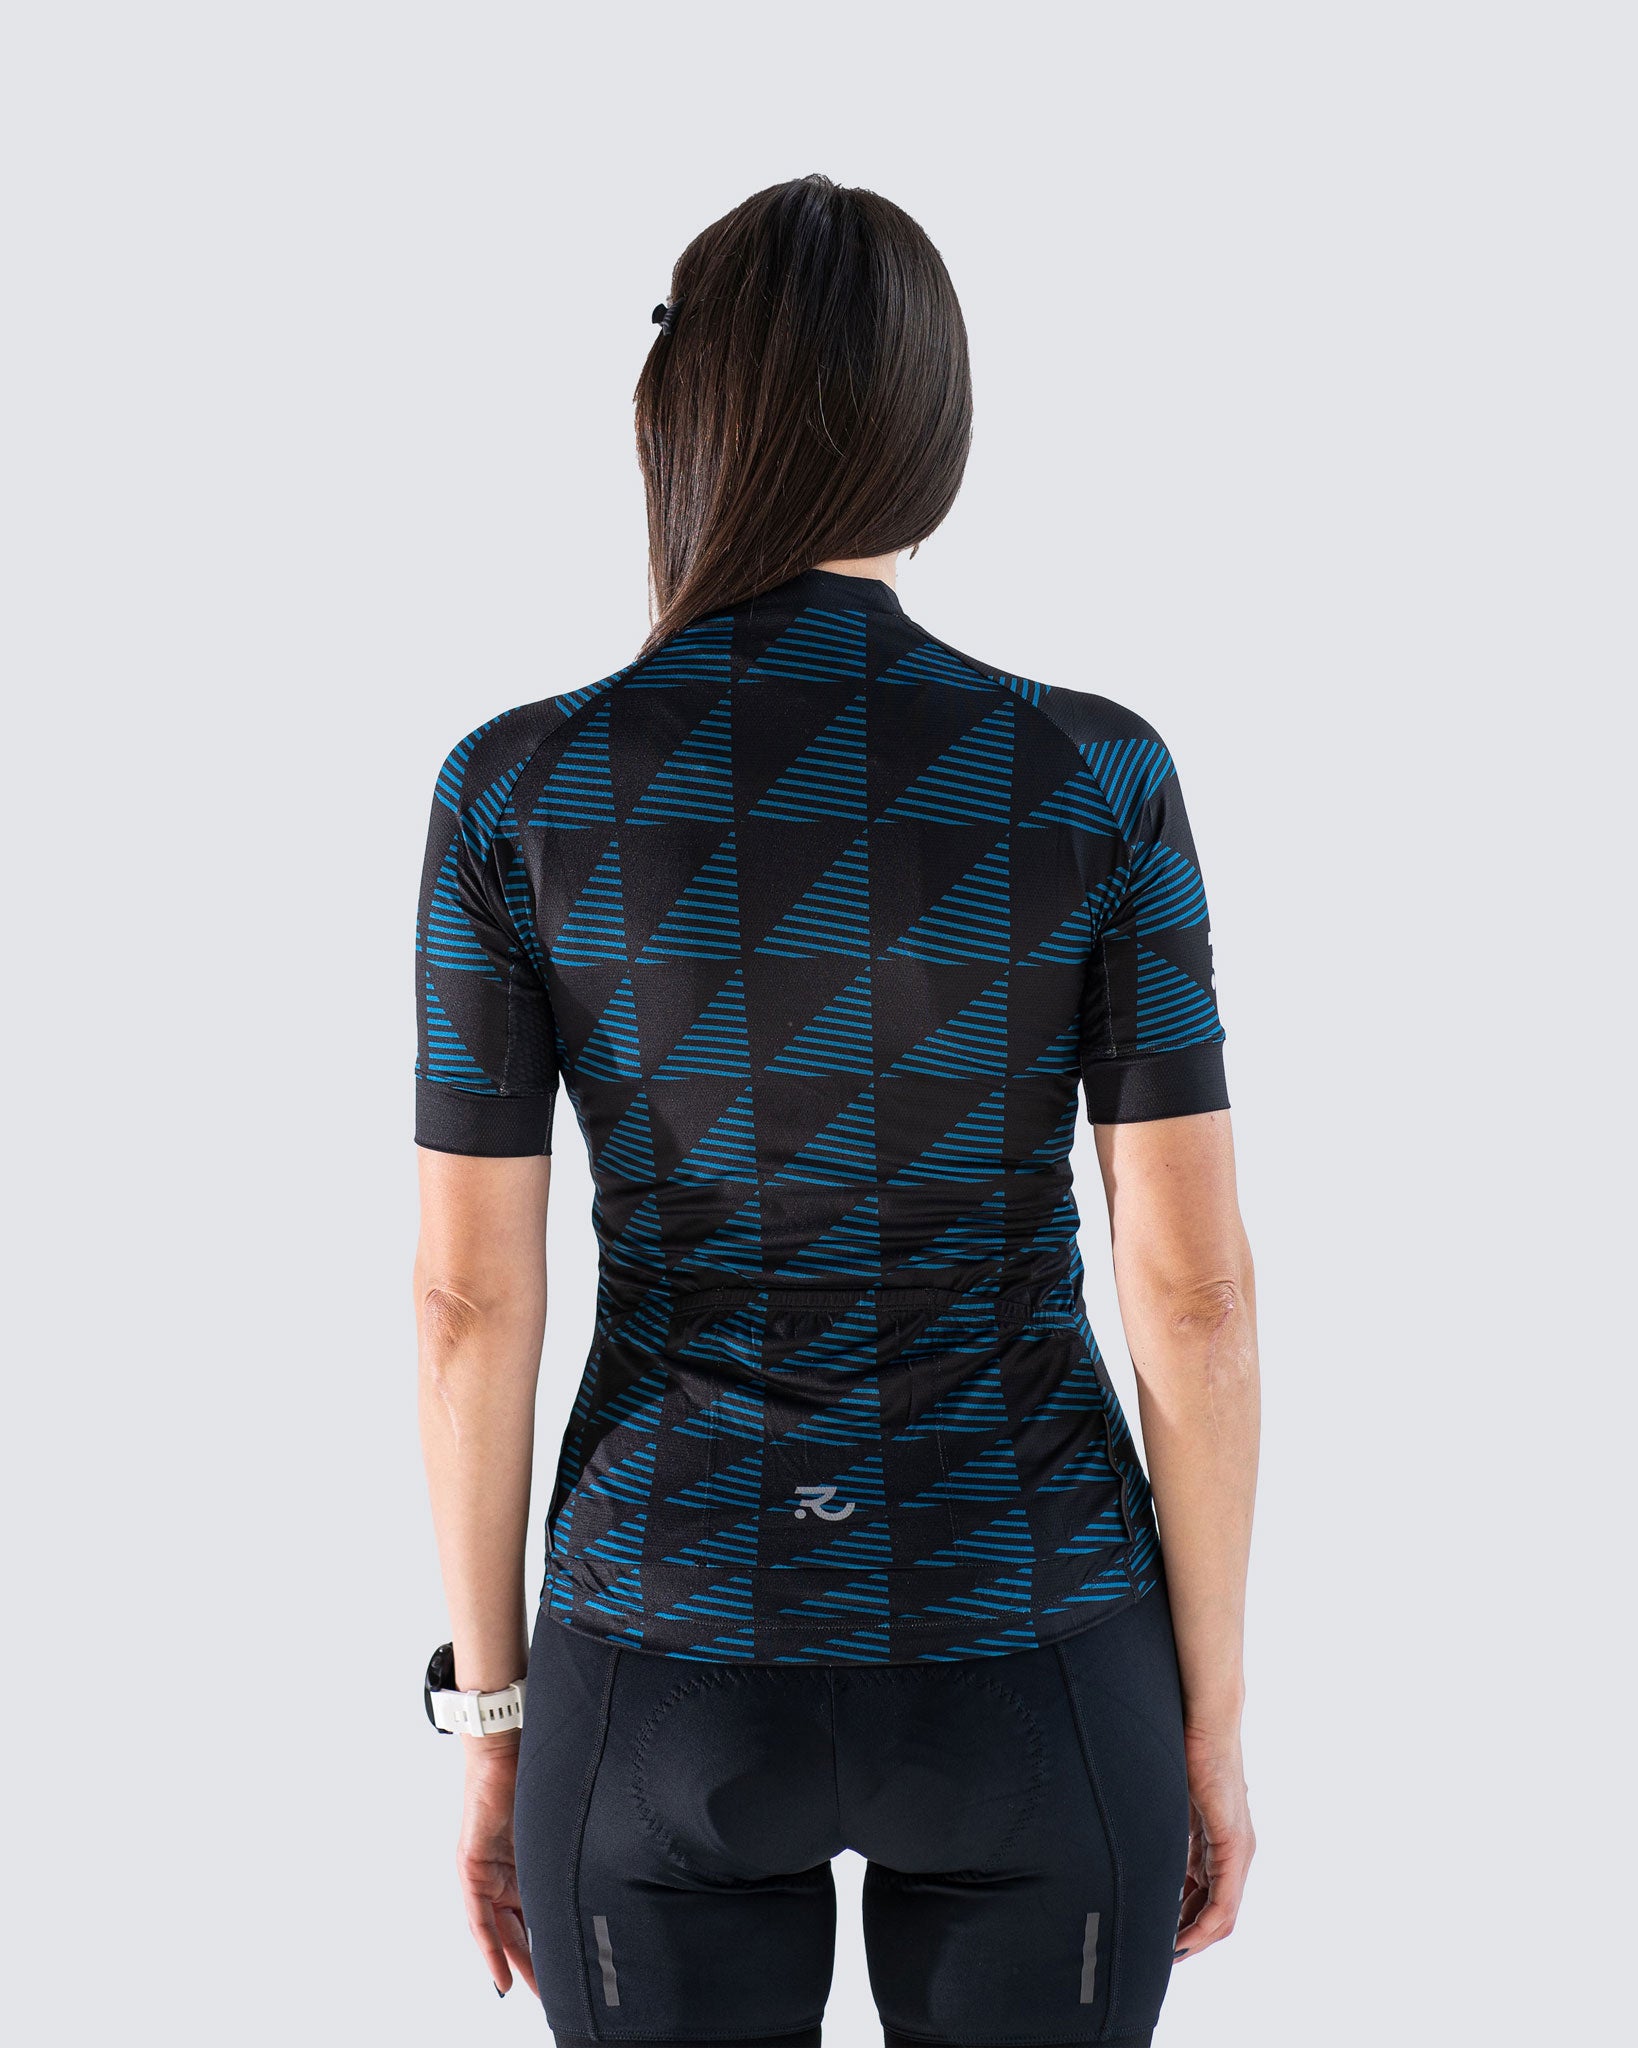 lead out blue women jersey back view